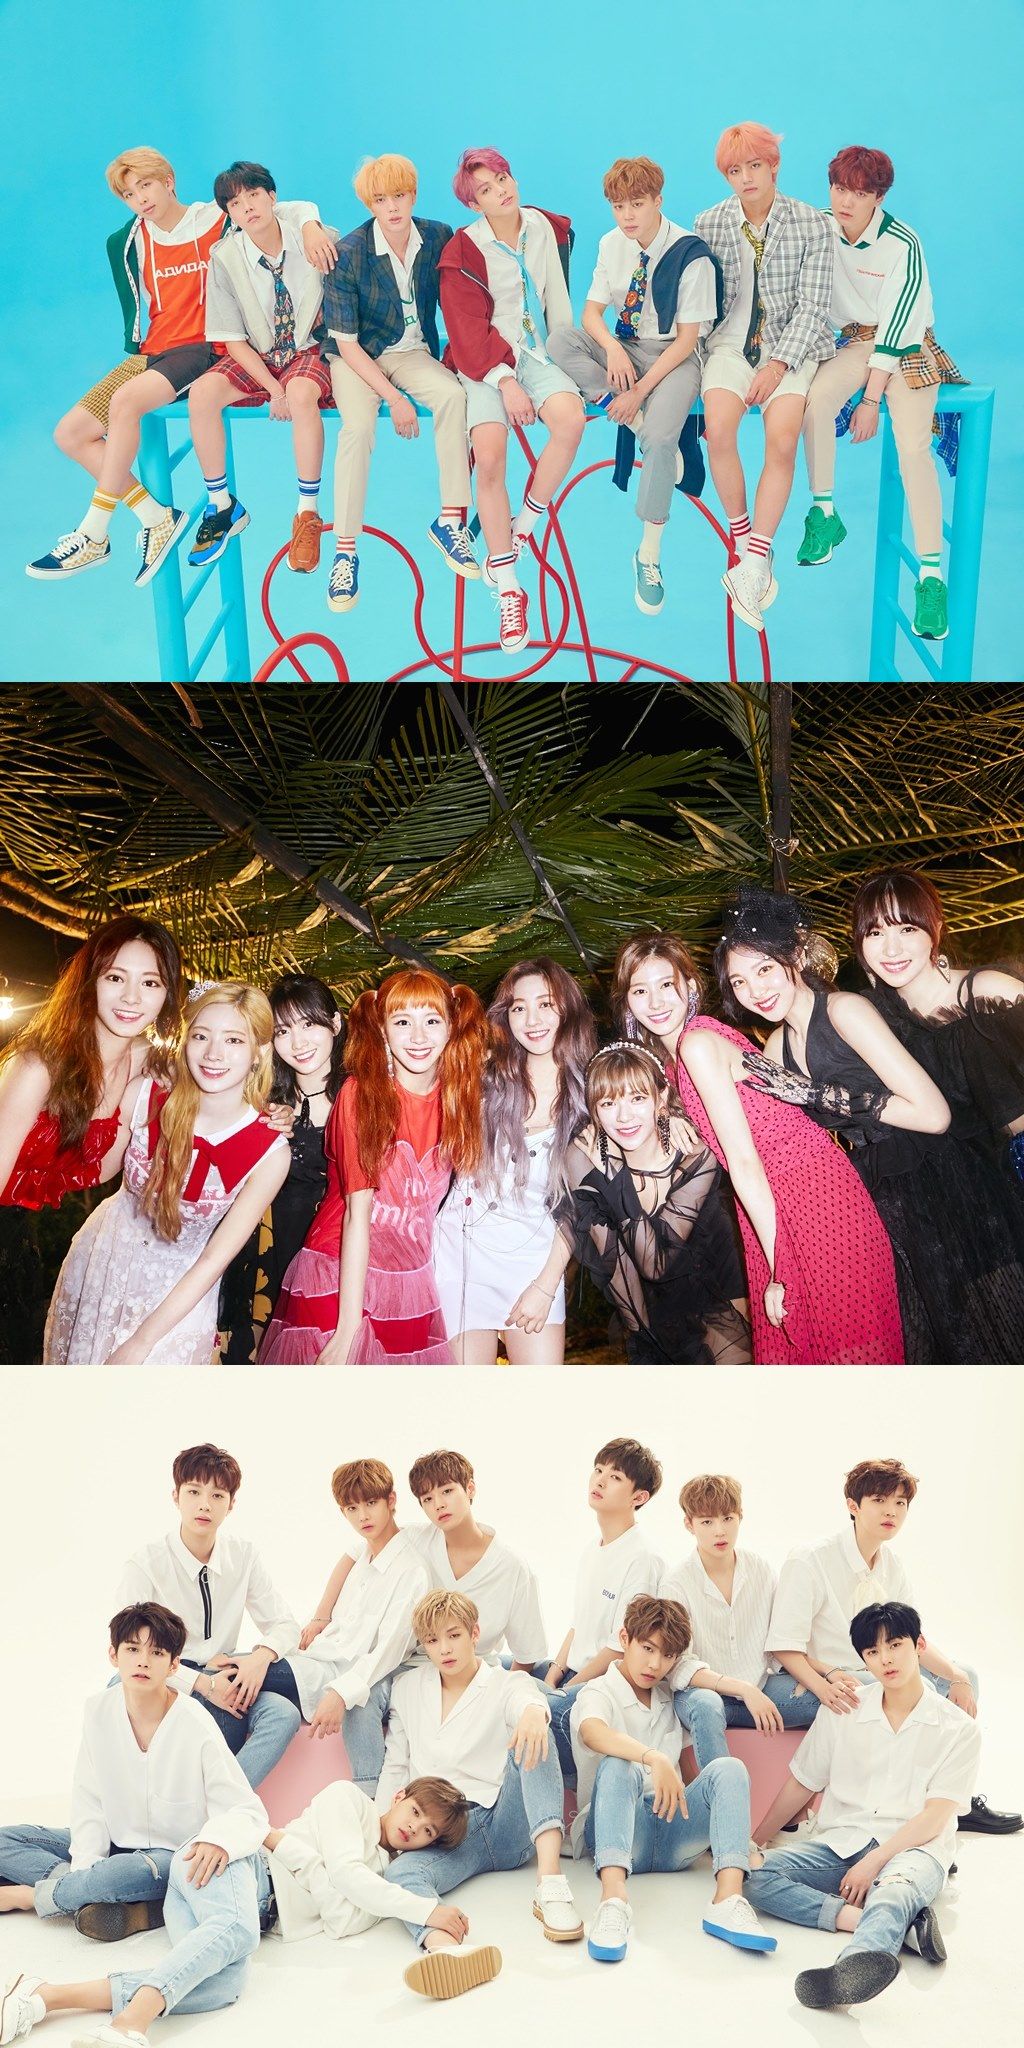 <p>The organizers of the 2018 MGA (MBC Plus X Genie Music Awards) announced on 9th that Bulletproof Boys, Lucky Twice and Wanna One have decided to attend the awards ceremony held on November 6th. The three most popular teams in the current K-Pop scene are nominated for the 2018 MGA. They are going to provide a stage for the audience to show off their elasticity.</p><p>According to the candidate lineup of the 2018 MGA Competition category released on the 1st Genie Music website, the Bulgarian Boy Scouts have won four awards including Singer of the Year, Song of the Year, Best-selling Artist of the Year Lucky Twice (Singer of the Year, Song of the Year, Best of the Year), Wanna One (Singer of the Year, Sing of the Year, Celing Artists) are also in three categories.</p><p>The K-POP Award 2018 MGA, co-hosted by MBC Plus (MBC PLUS) and Genie Music, is the first awards ceremony for broadcasting companies and music platform companies. You can check. Online Voting by Competition will be held until 31st of this month. It will be held on November 6th at Incheon Namdong Gymnasium.</p>